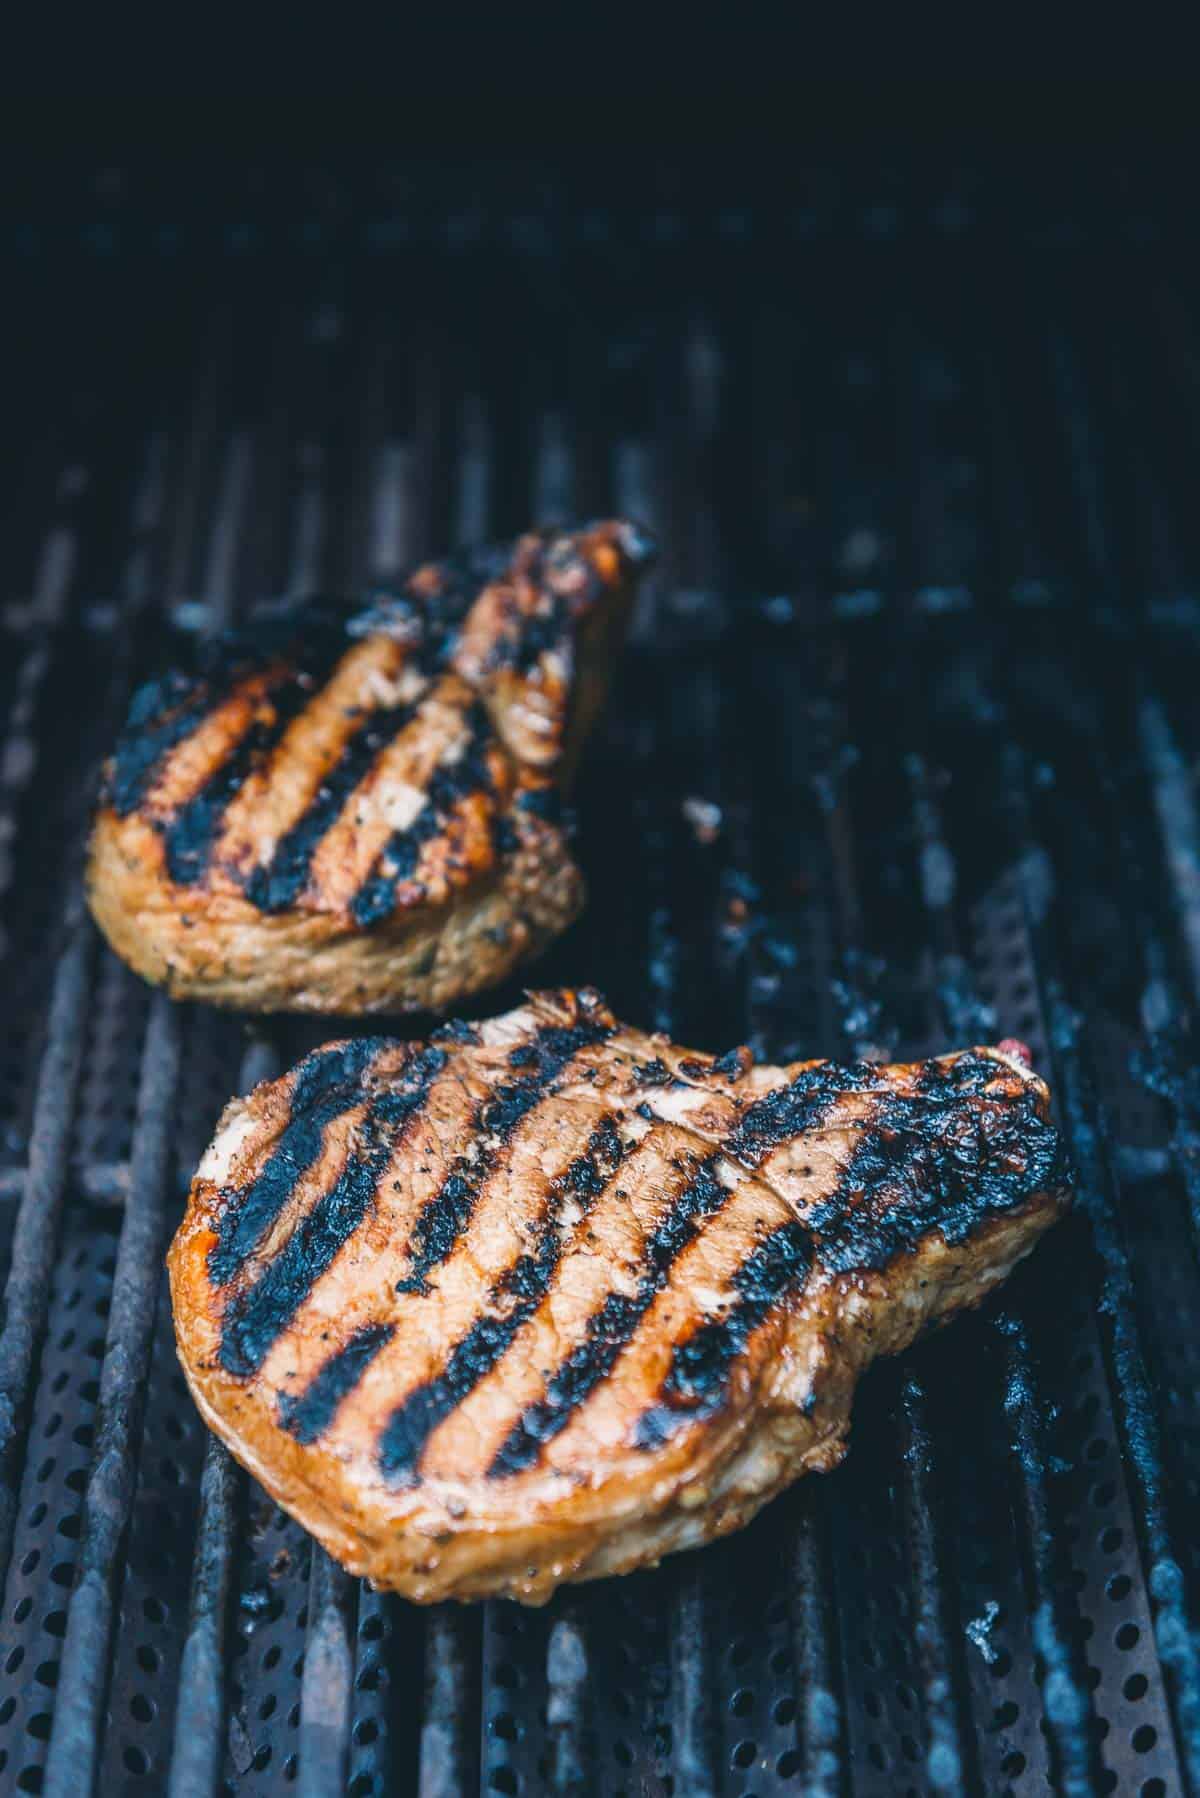 Pork chops flipped on the grill to show grill marks.